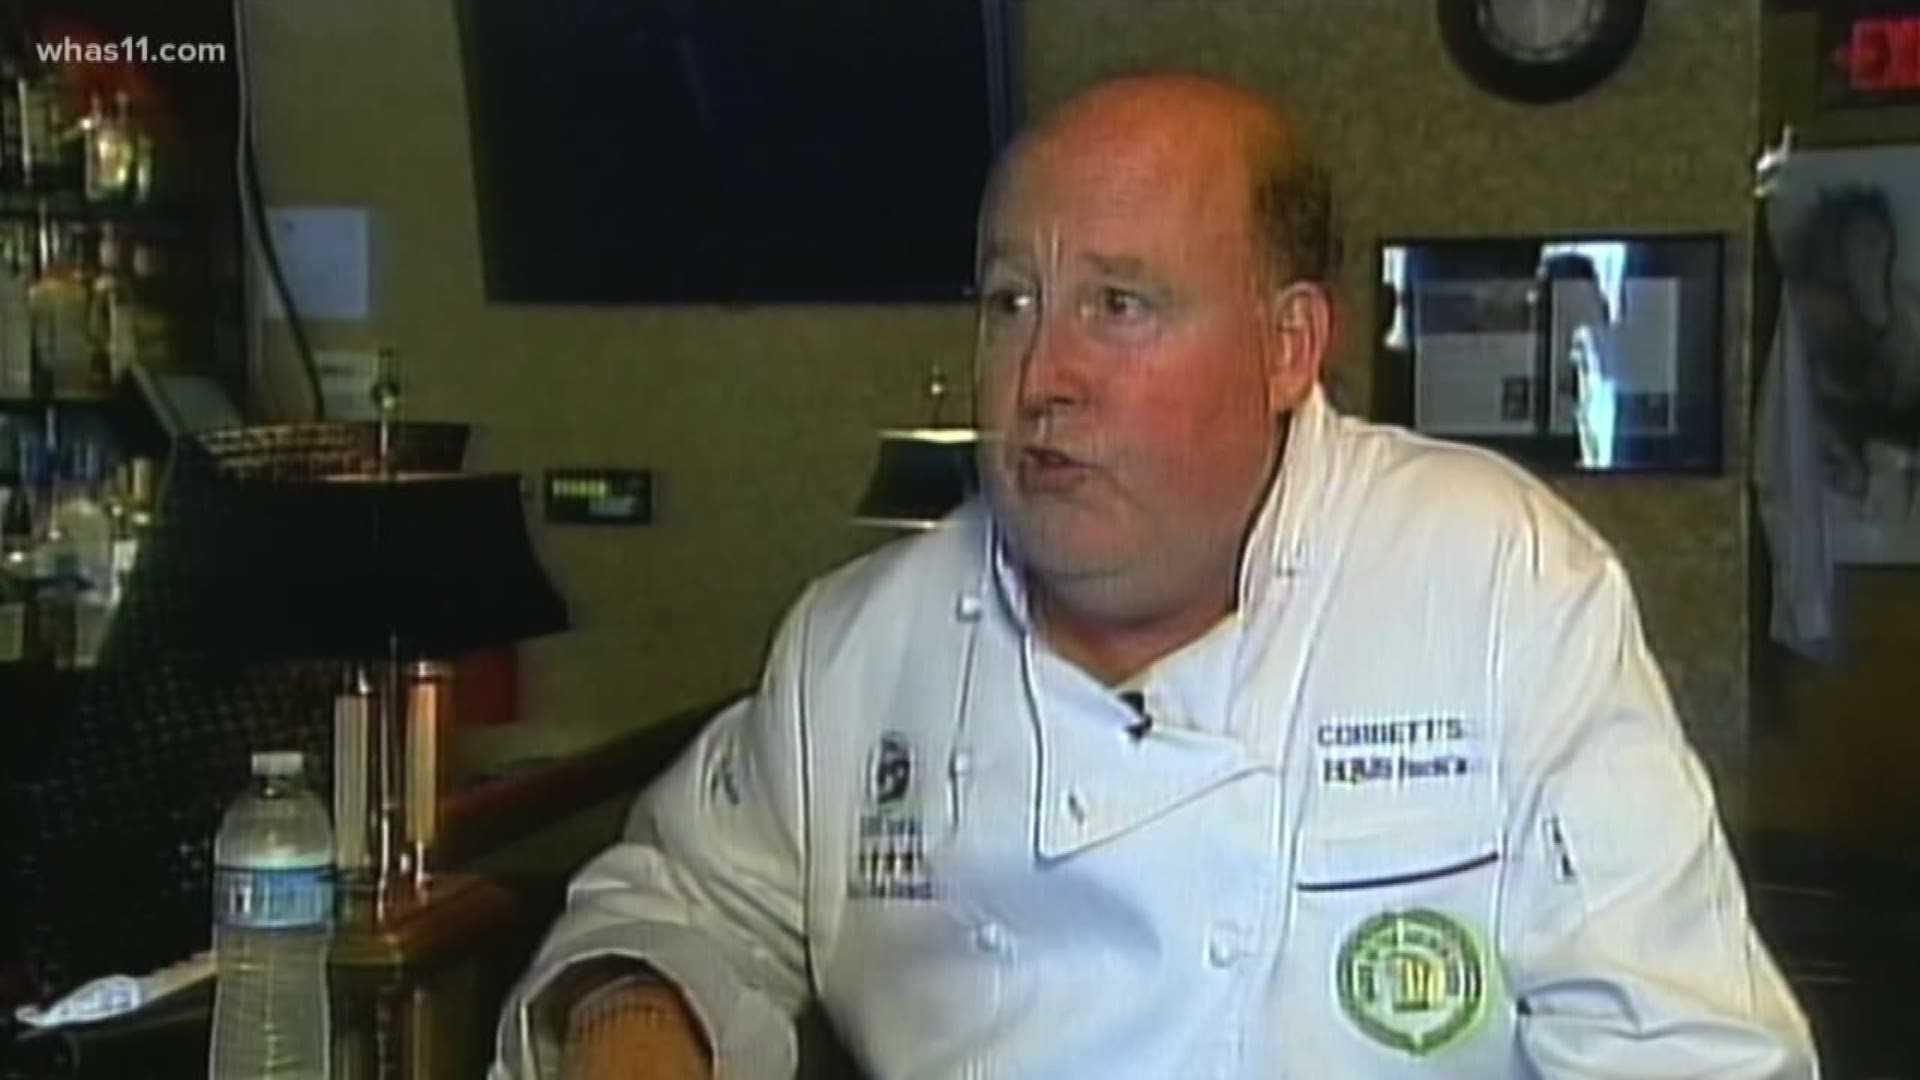 Beloved chef Dean Corbett died from a heart attack on Saturday